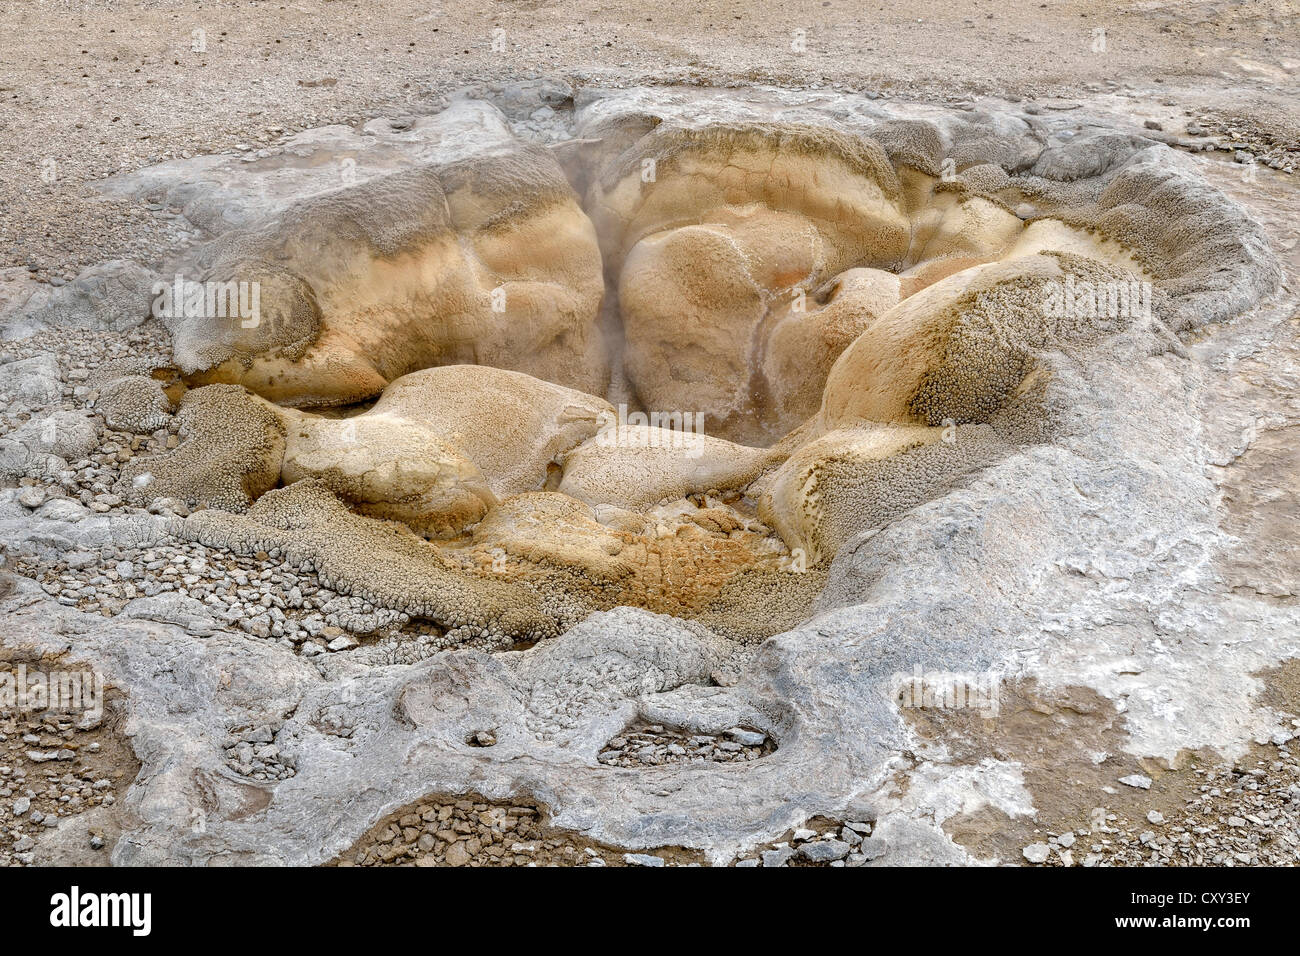 Printemps Shell, Biscuit Basin, Parc National de Yellowstone, Wyoming, USA Banque D'Images